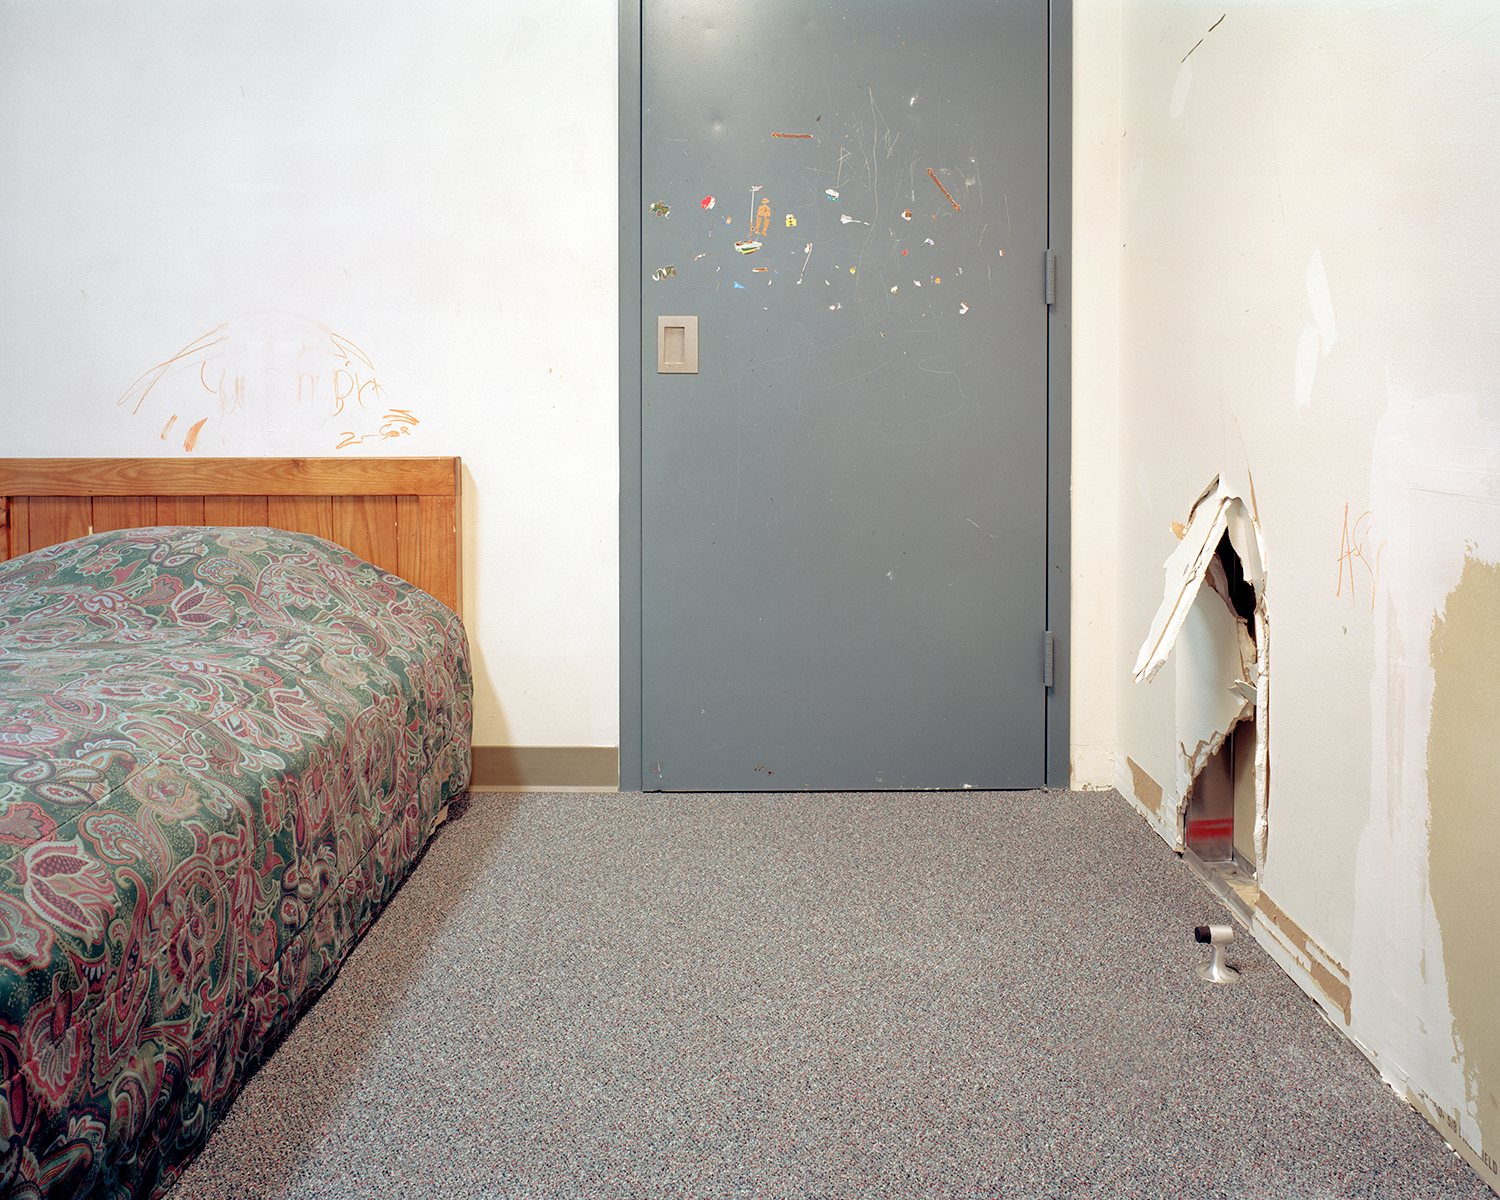  Untitled (Institutional Boy's Room)